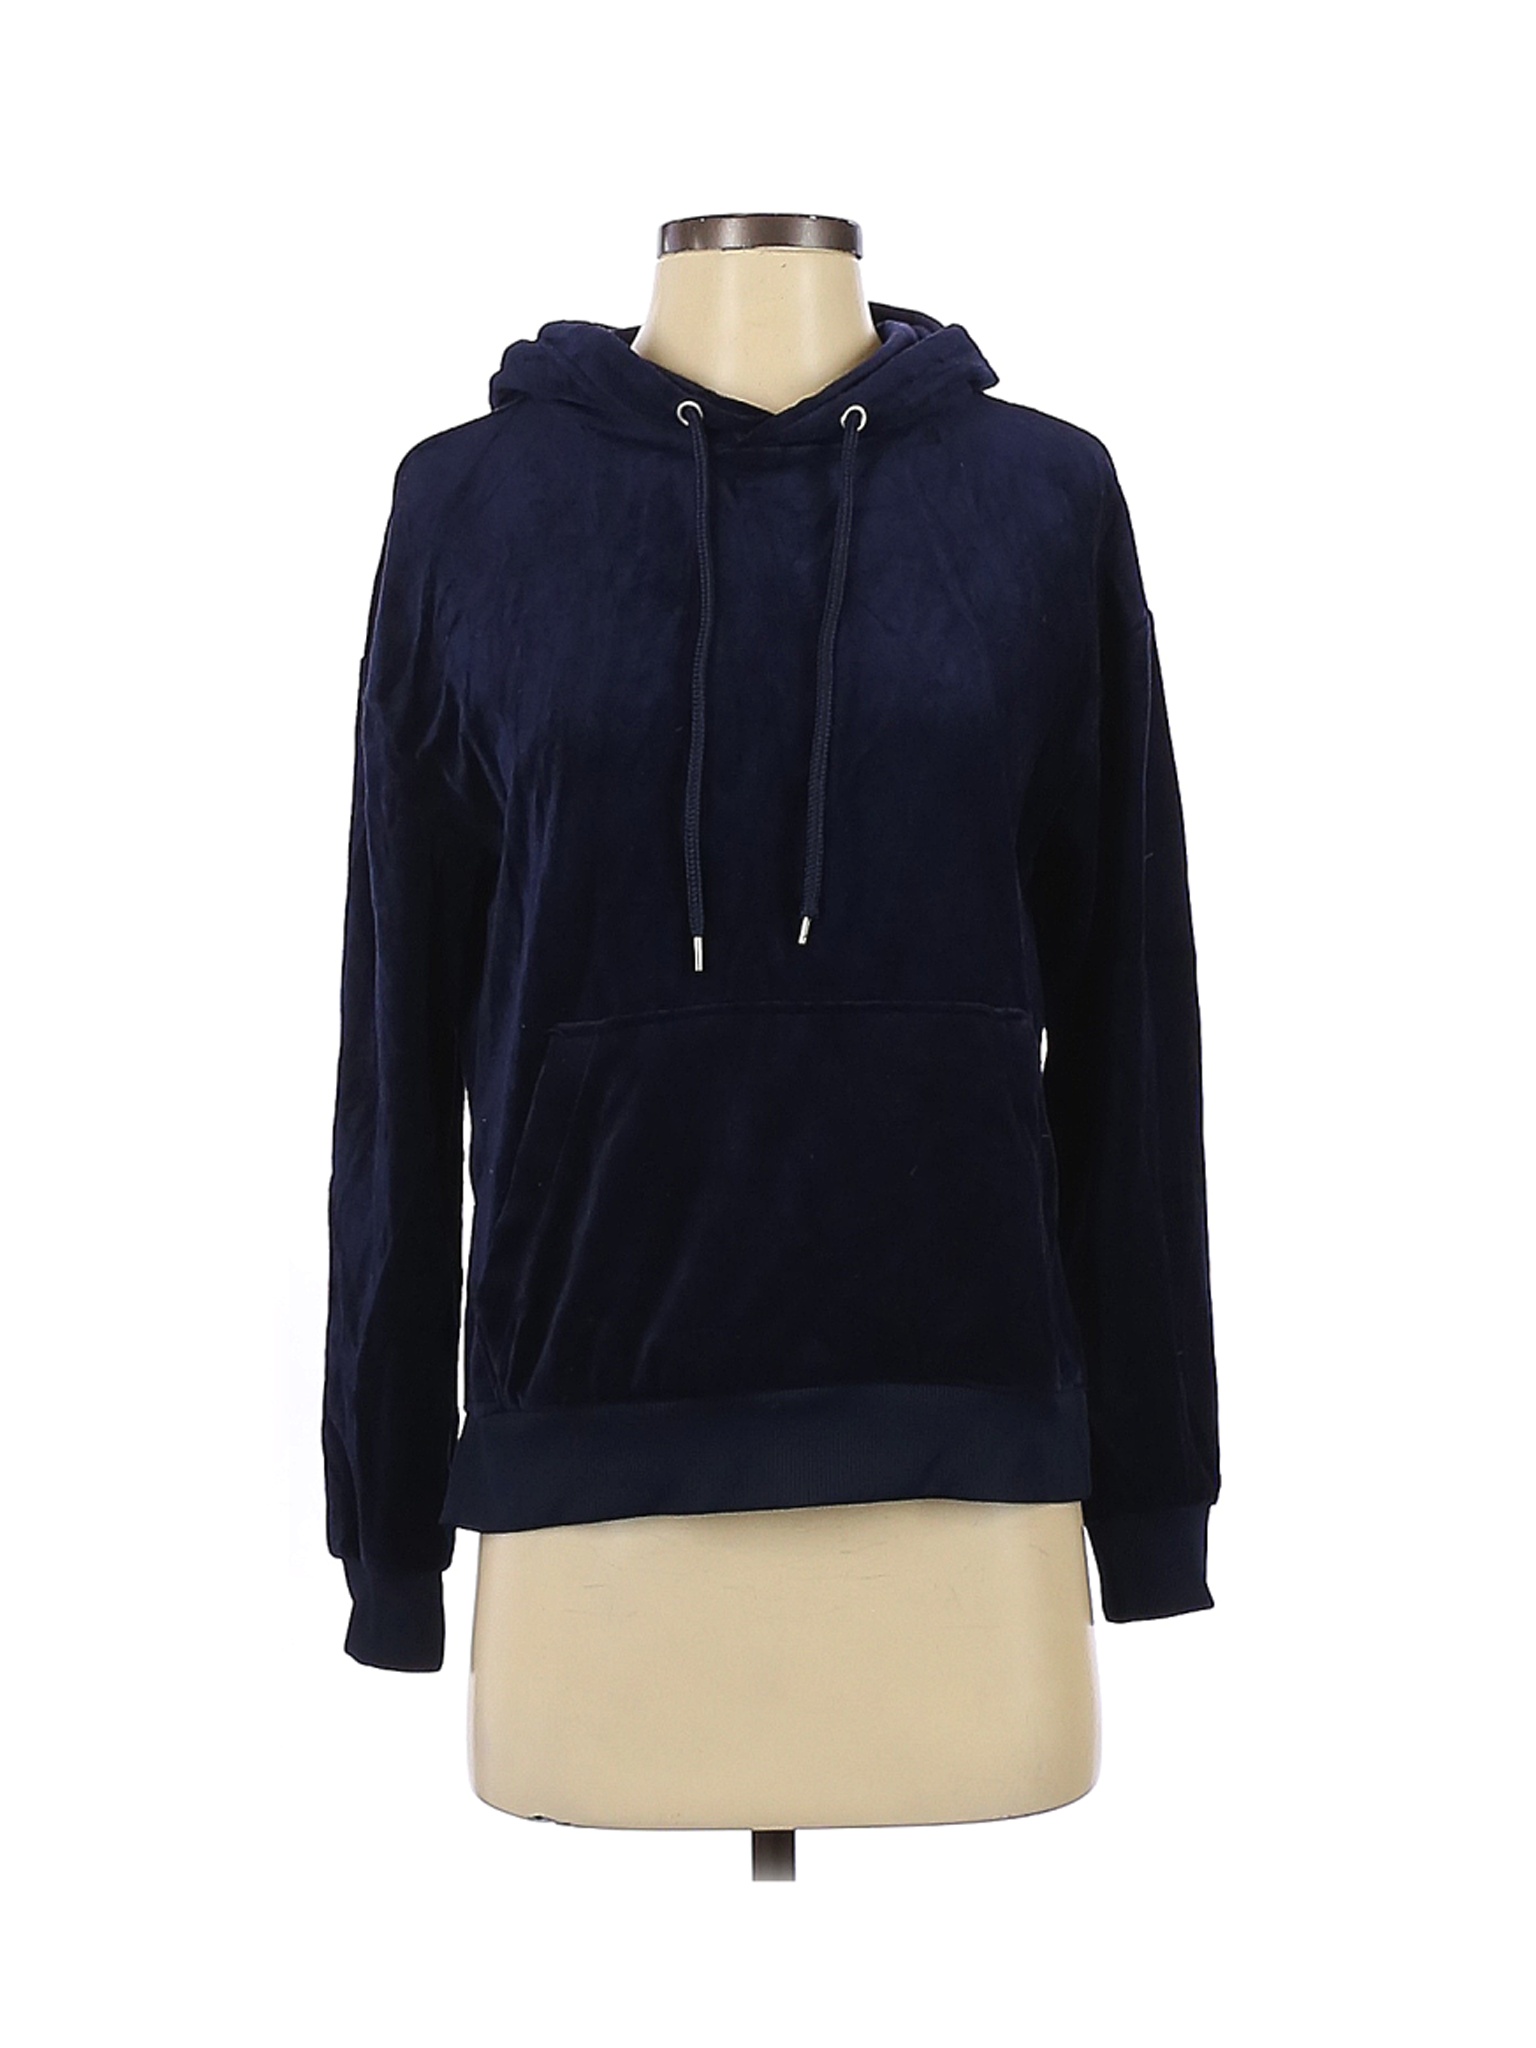 Divided by H&M Women Blue Pullover Hoodie XS | eBay